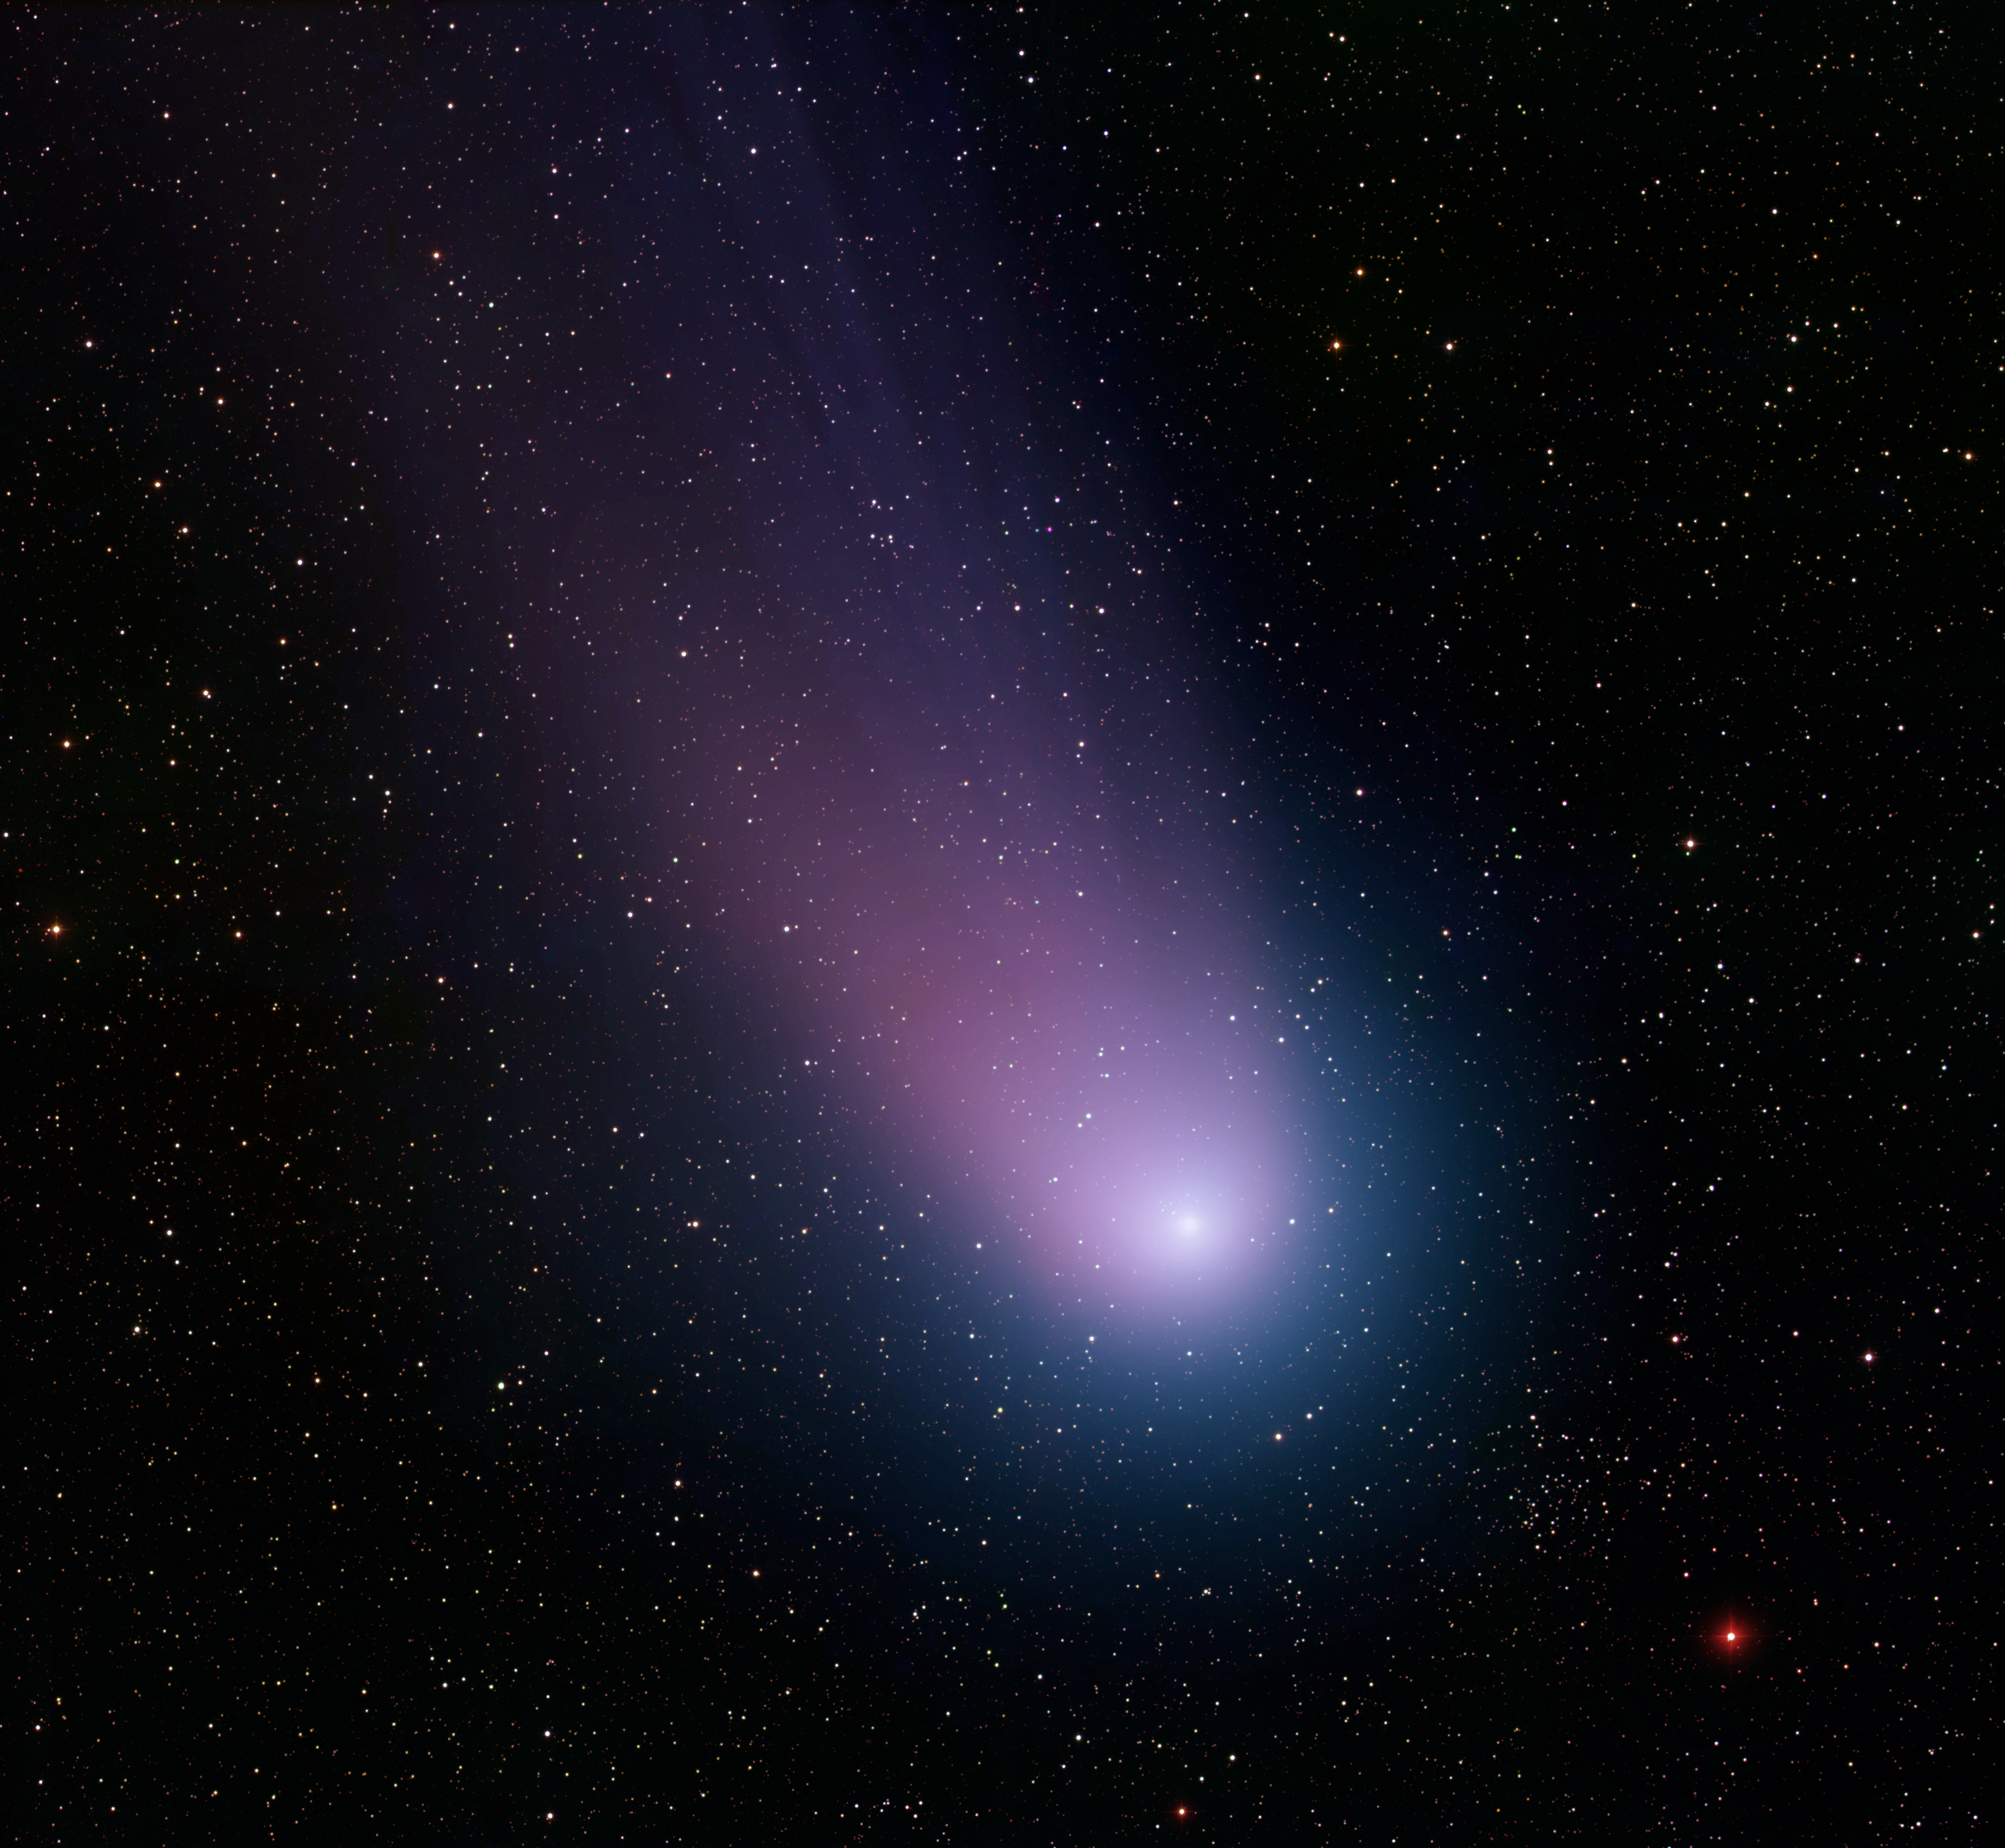 Image of a comet with a purple tail flying through space